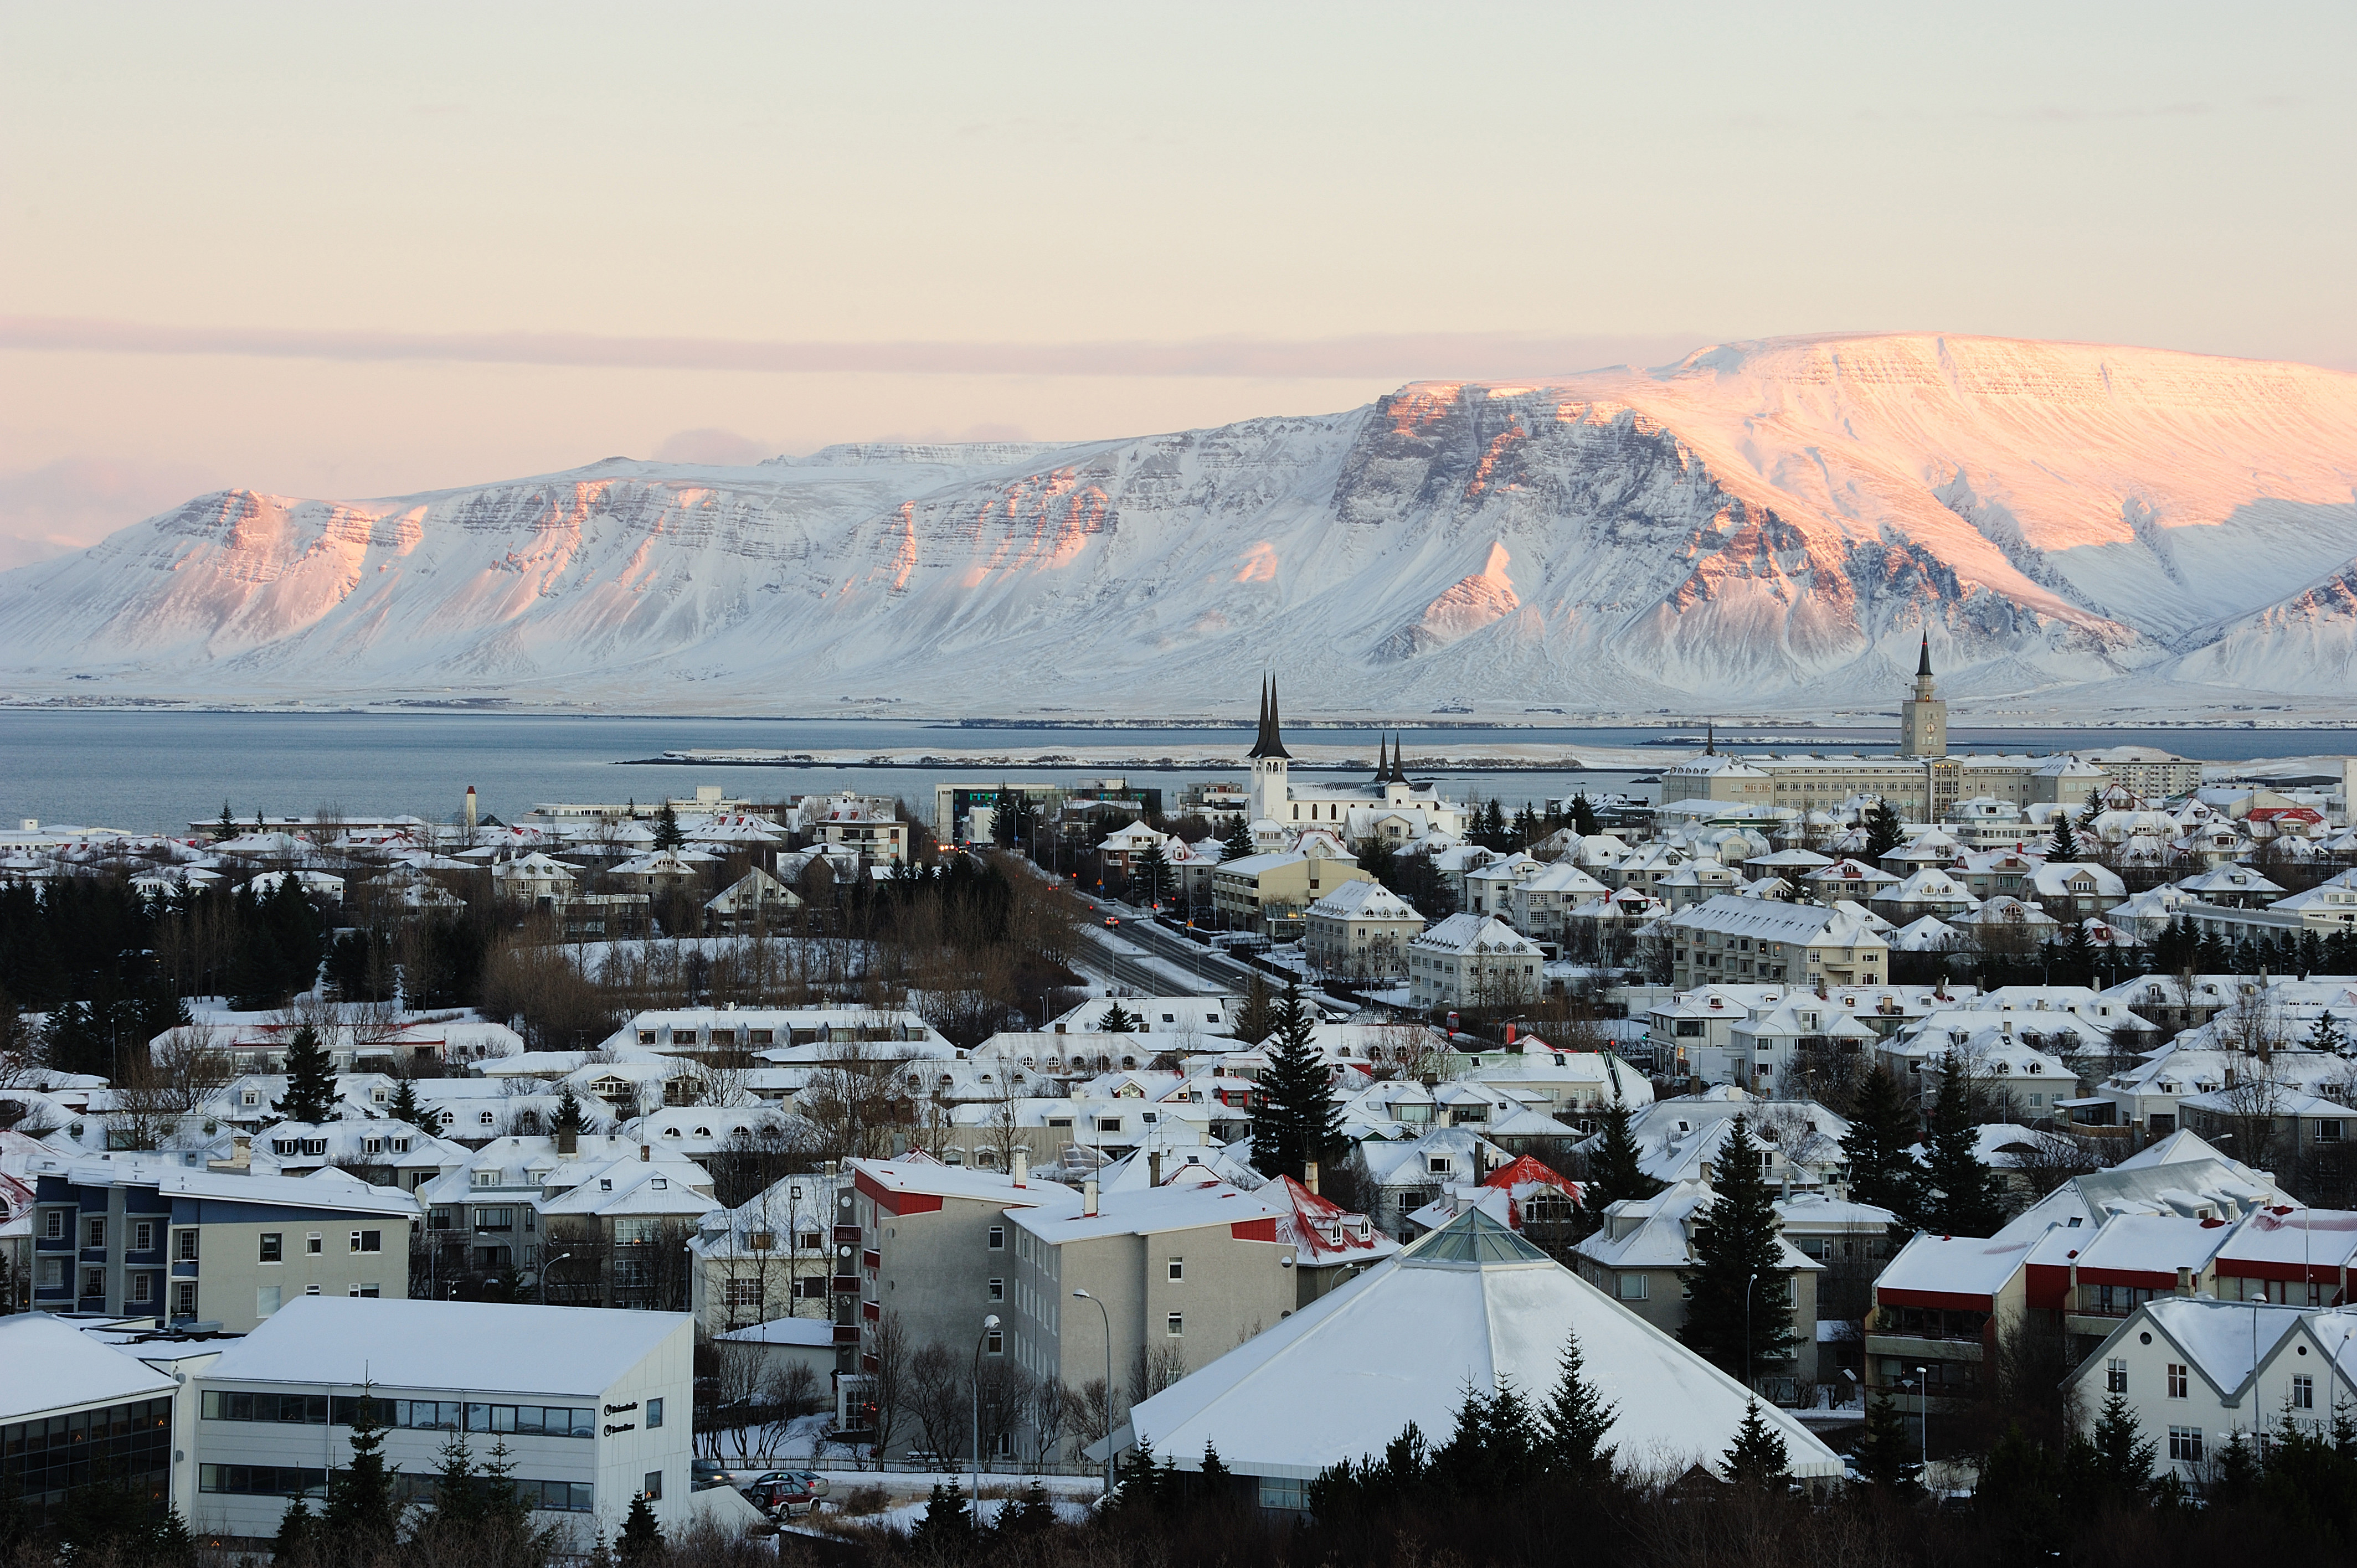 View of Reykjavik city with mountains in the background during a sunset